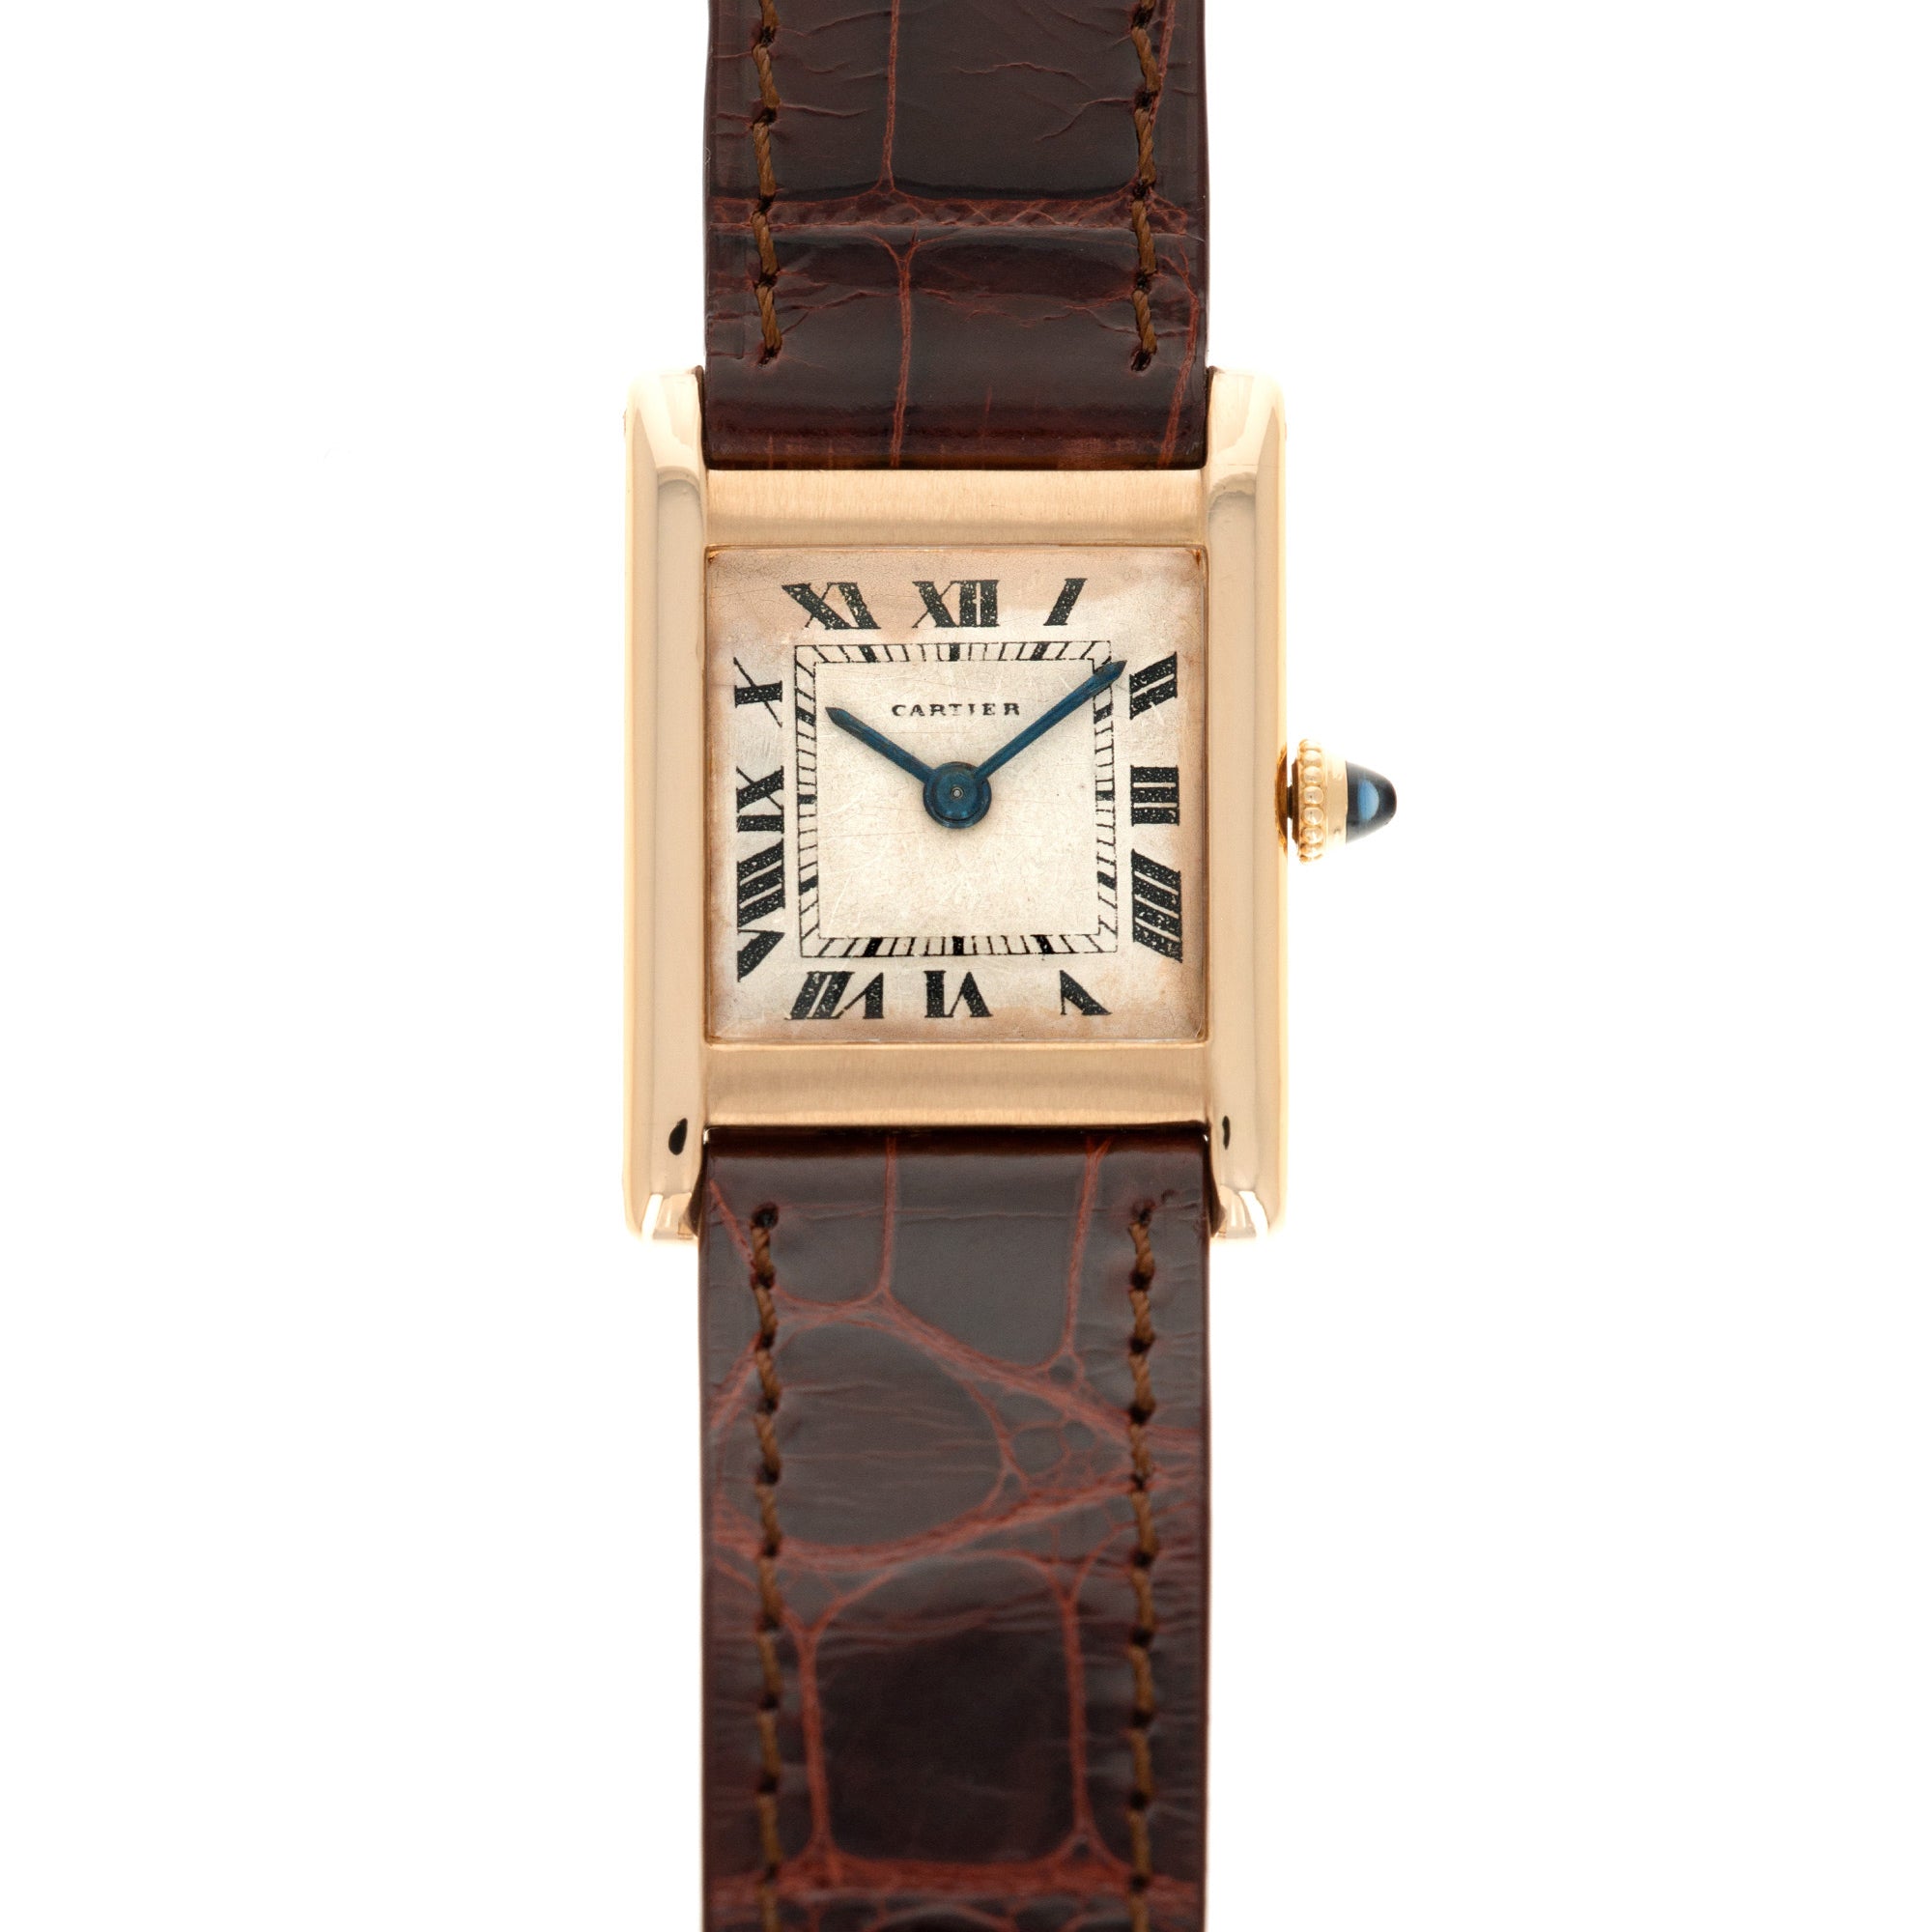 Cartier - Cartier Yellow Gold Tank Normale Watch - The Keystone Watches